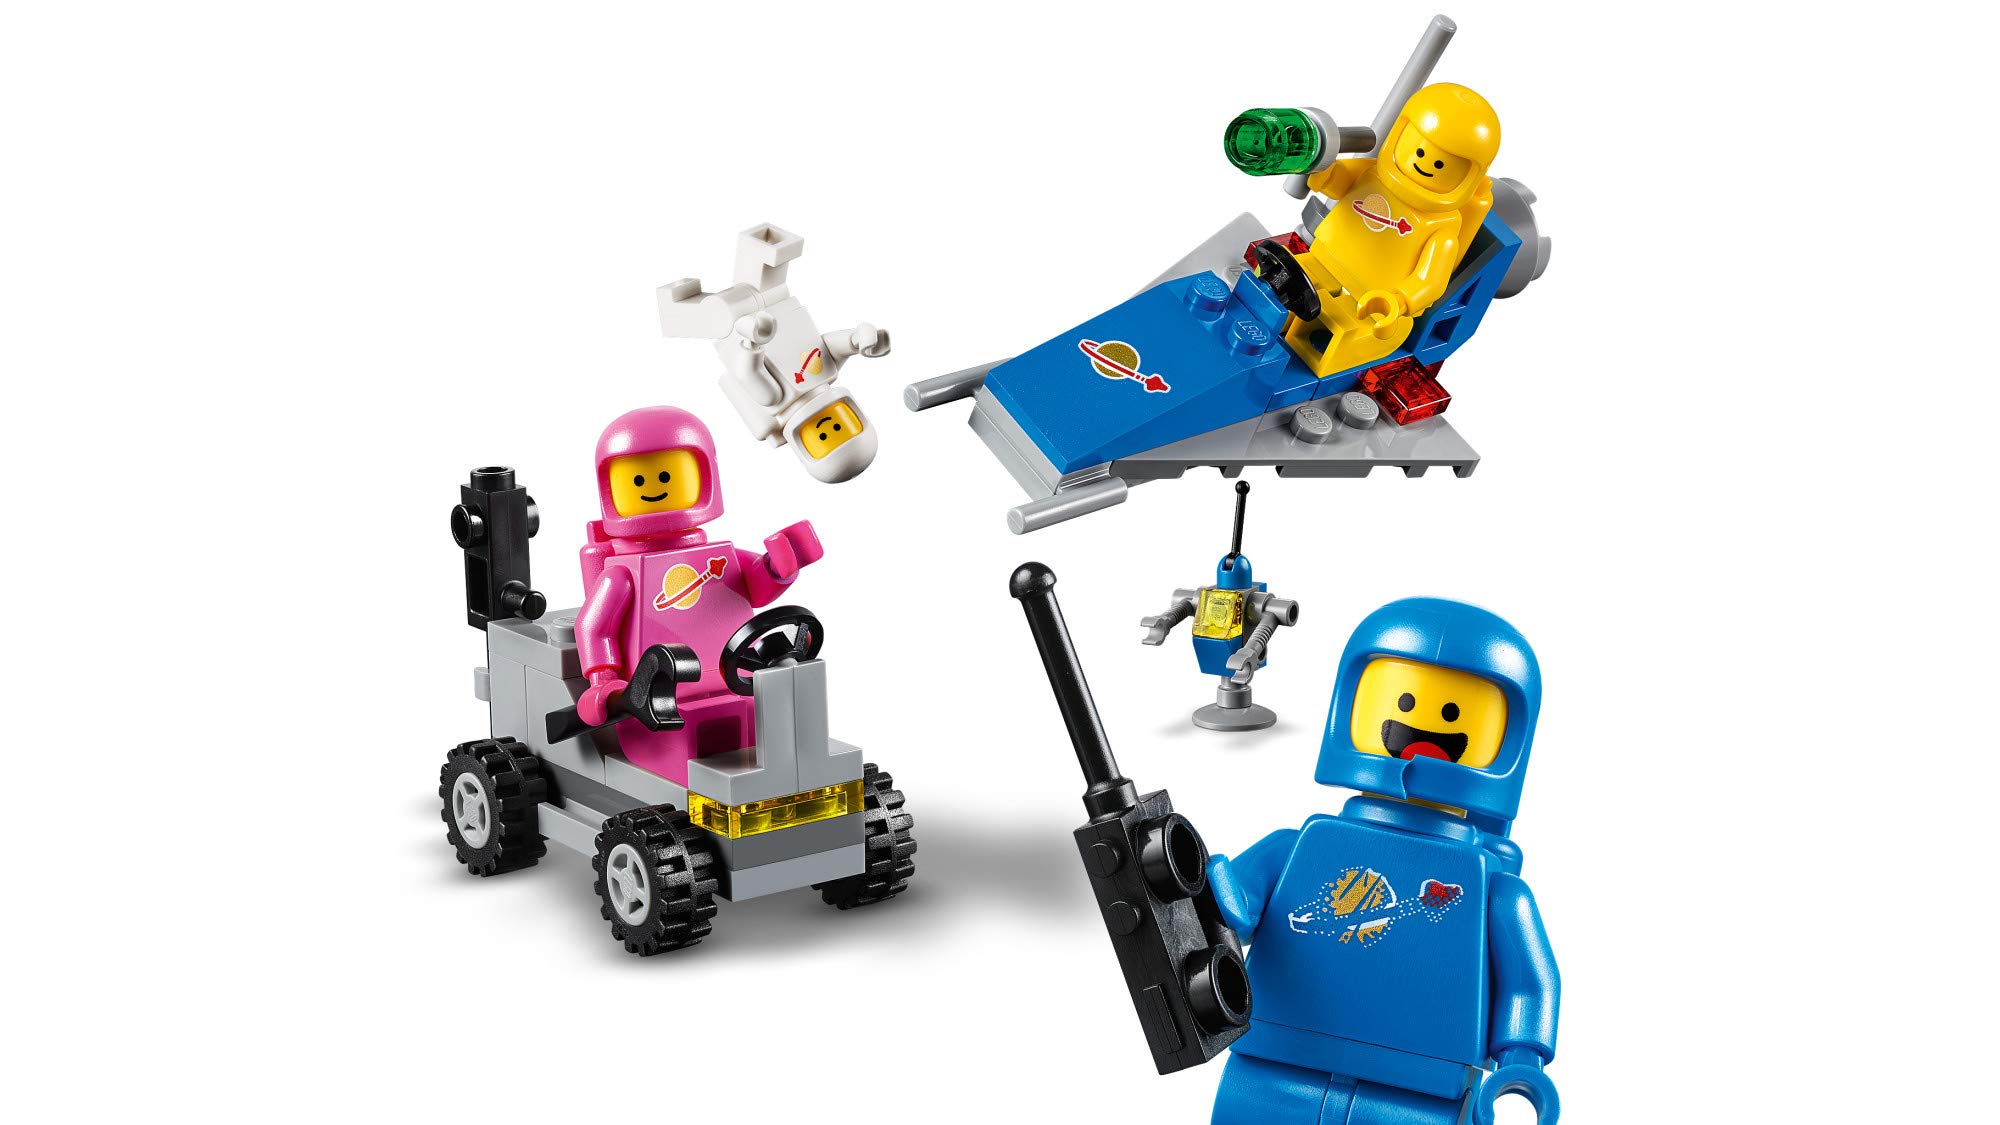 LEGO The Movie 2 Benny’s Space Squad 70841 Building Kit, Kids Playset with Space Toys and Astronaut Figures (68 Pieces) (Discontinued by Manufacturer)